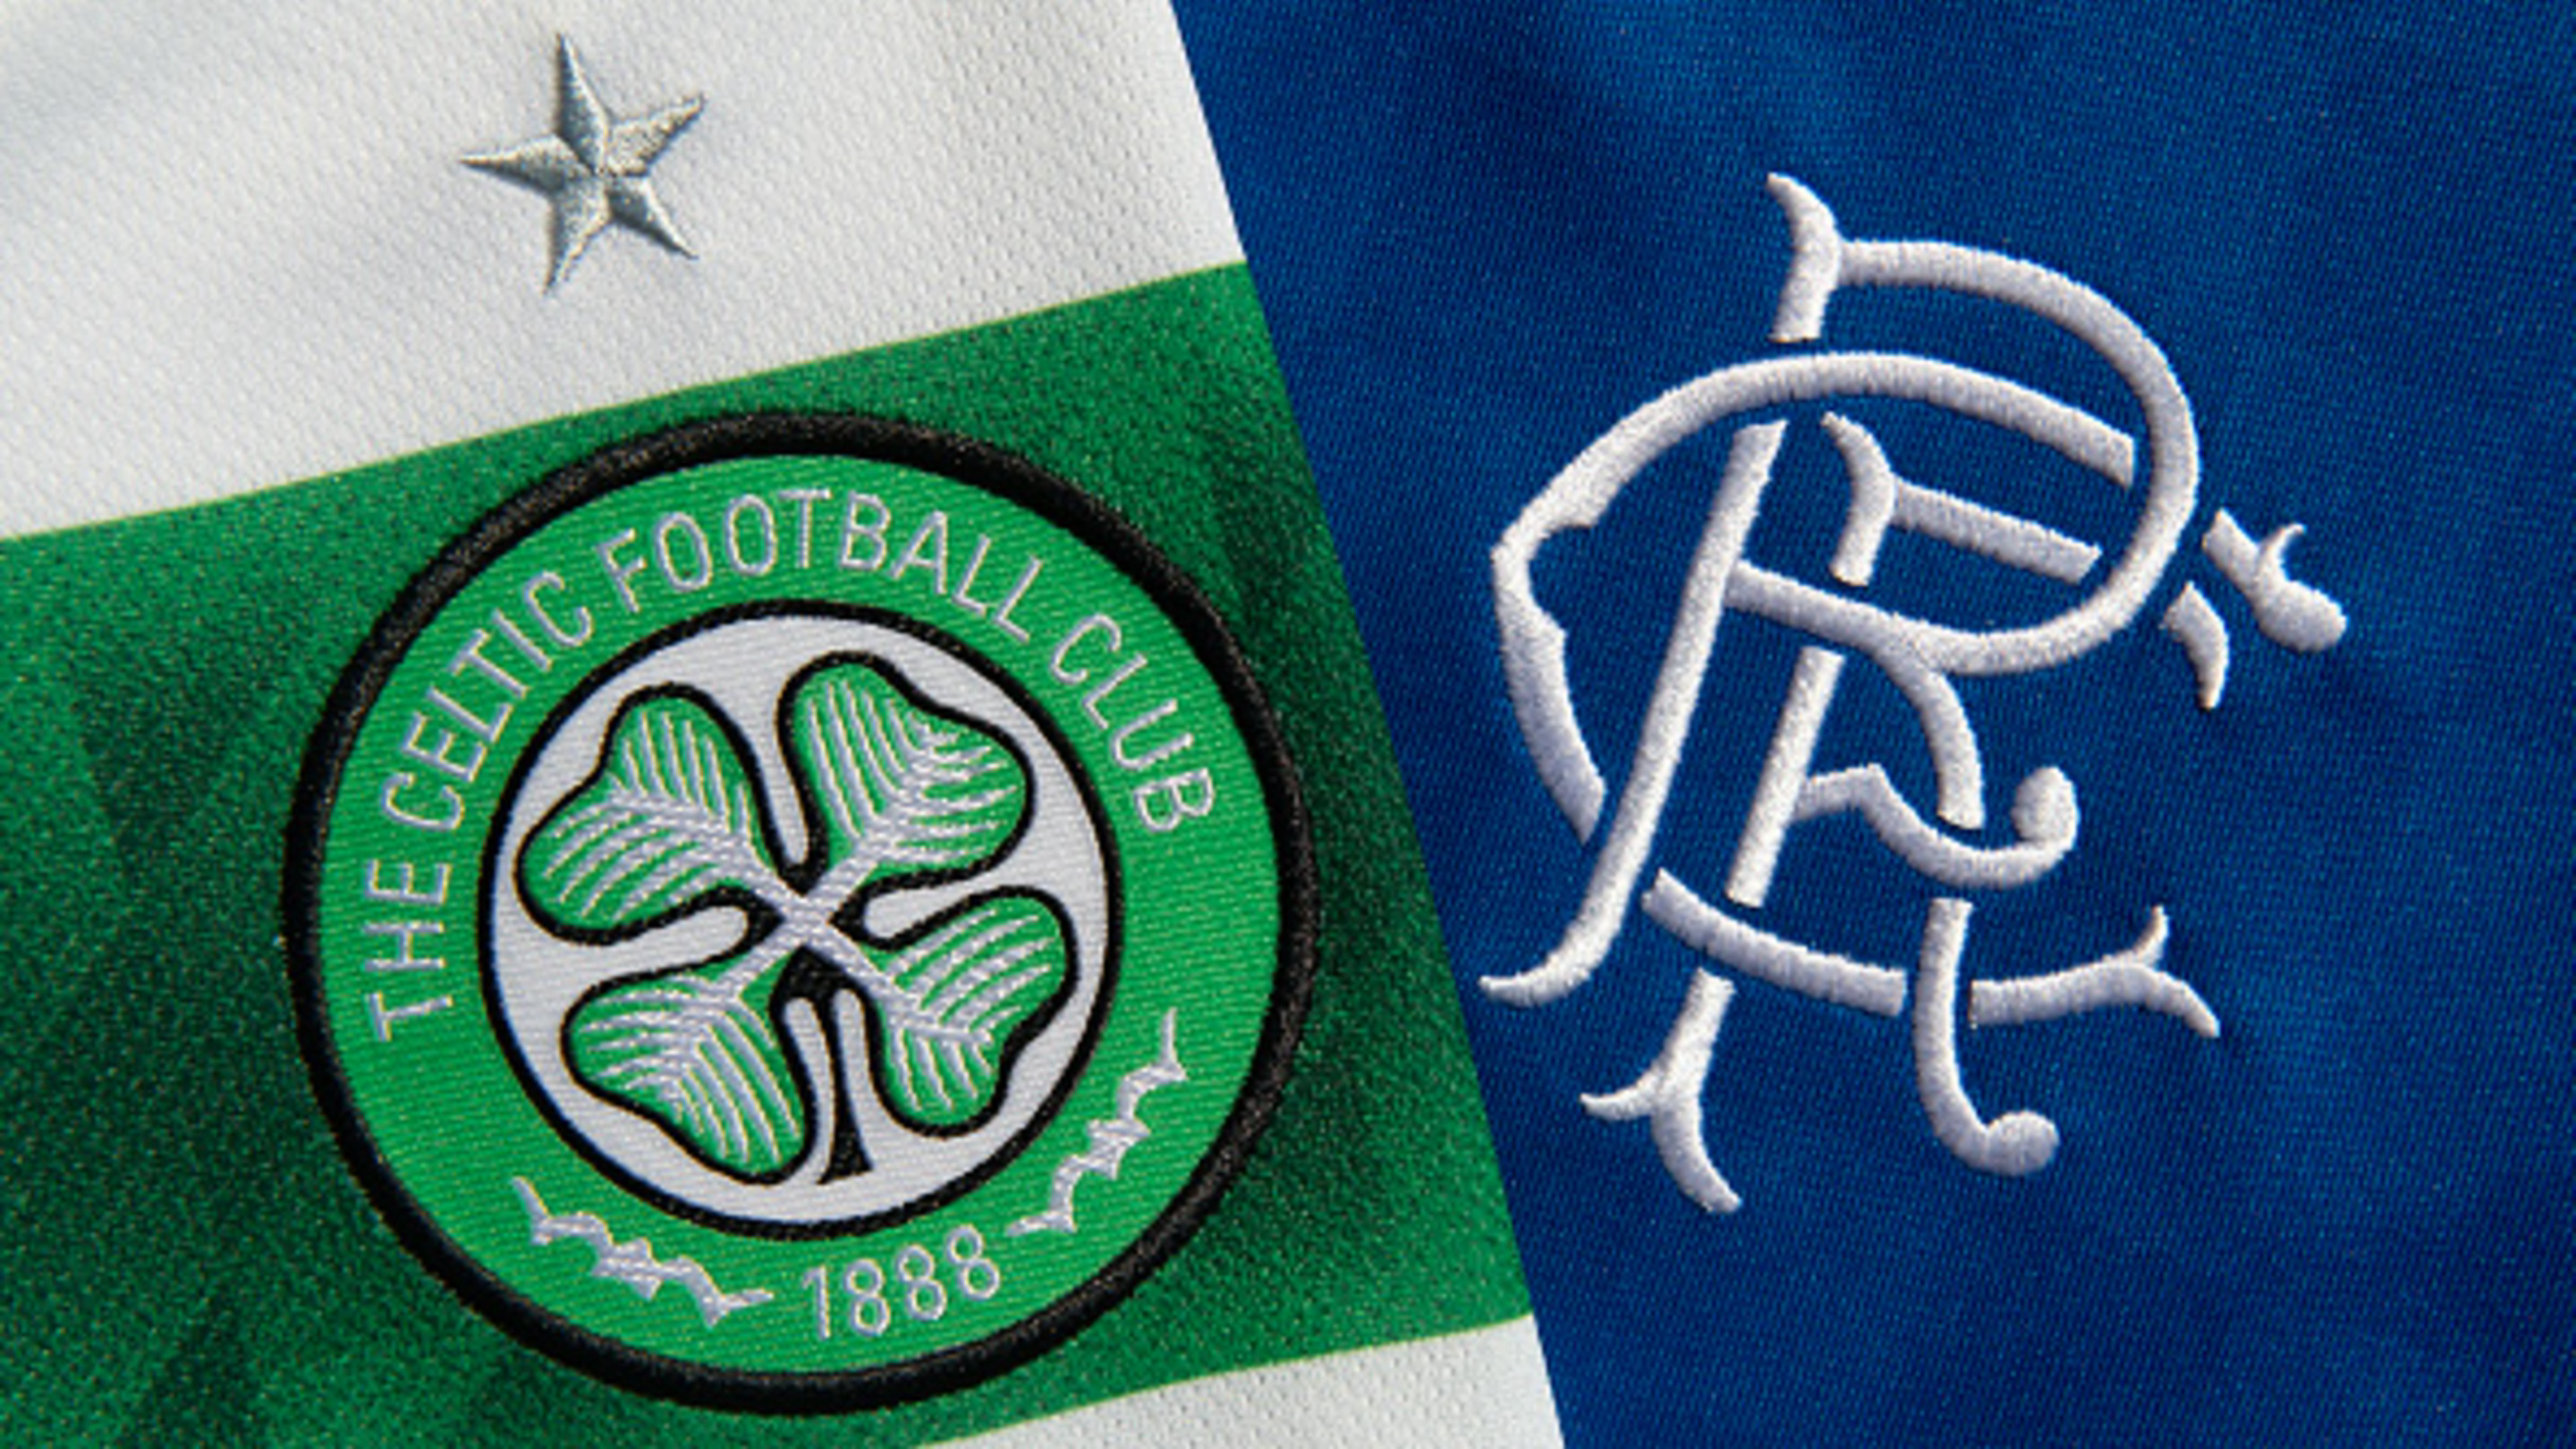 Celtic vs Rangers: Preview, predictions and lineups